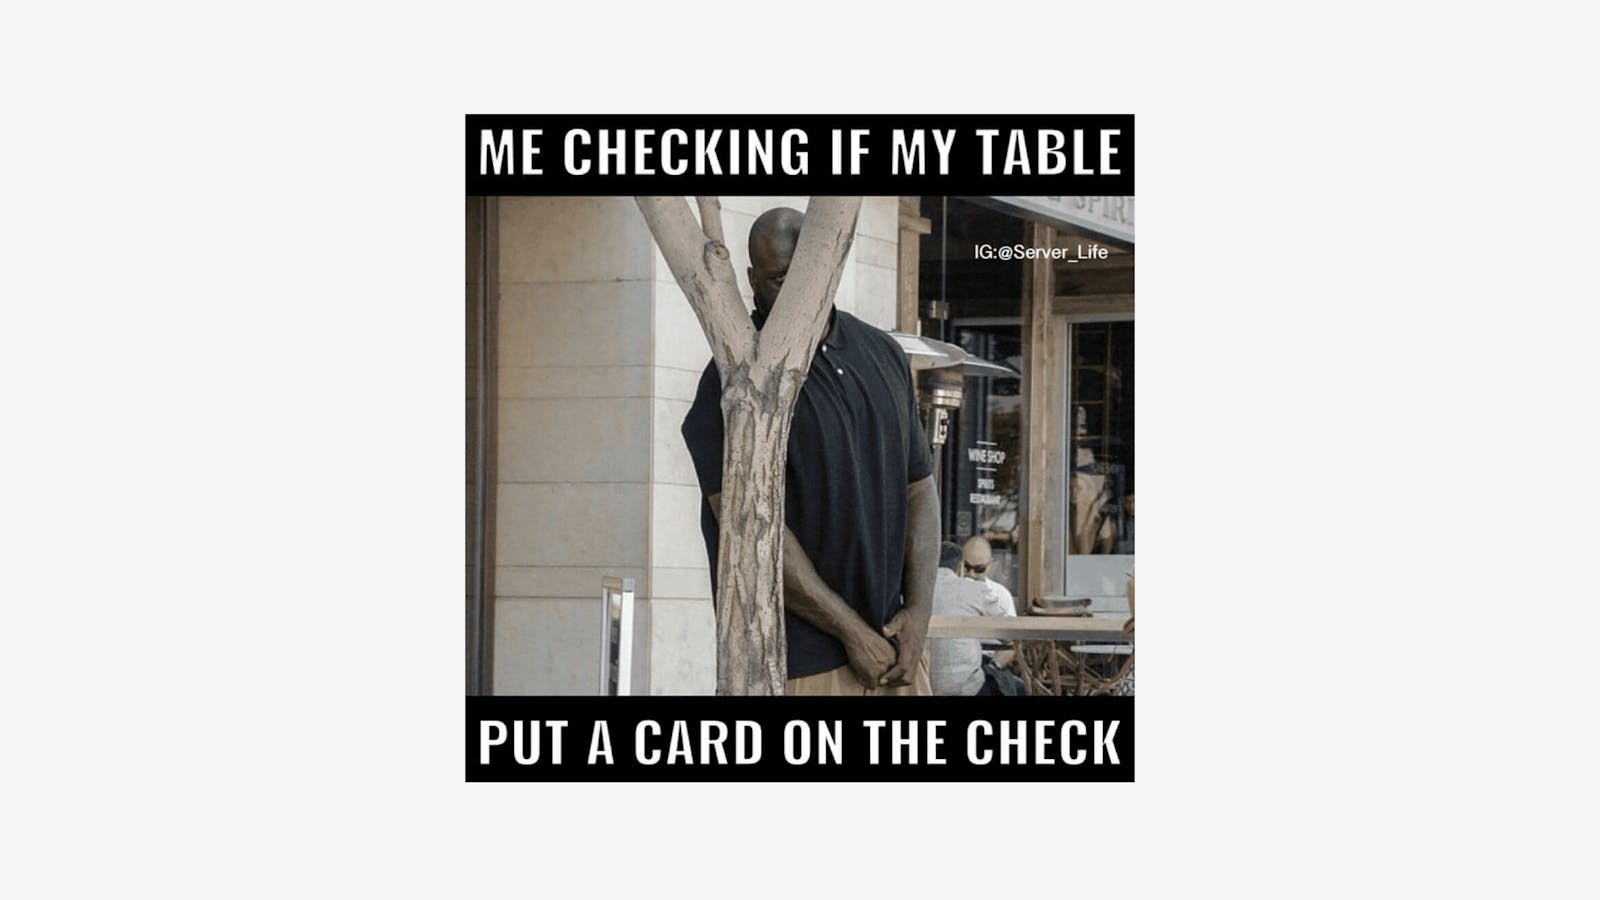 Me checking if my table put a card on the check restaurant meme.